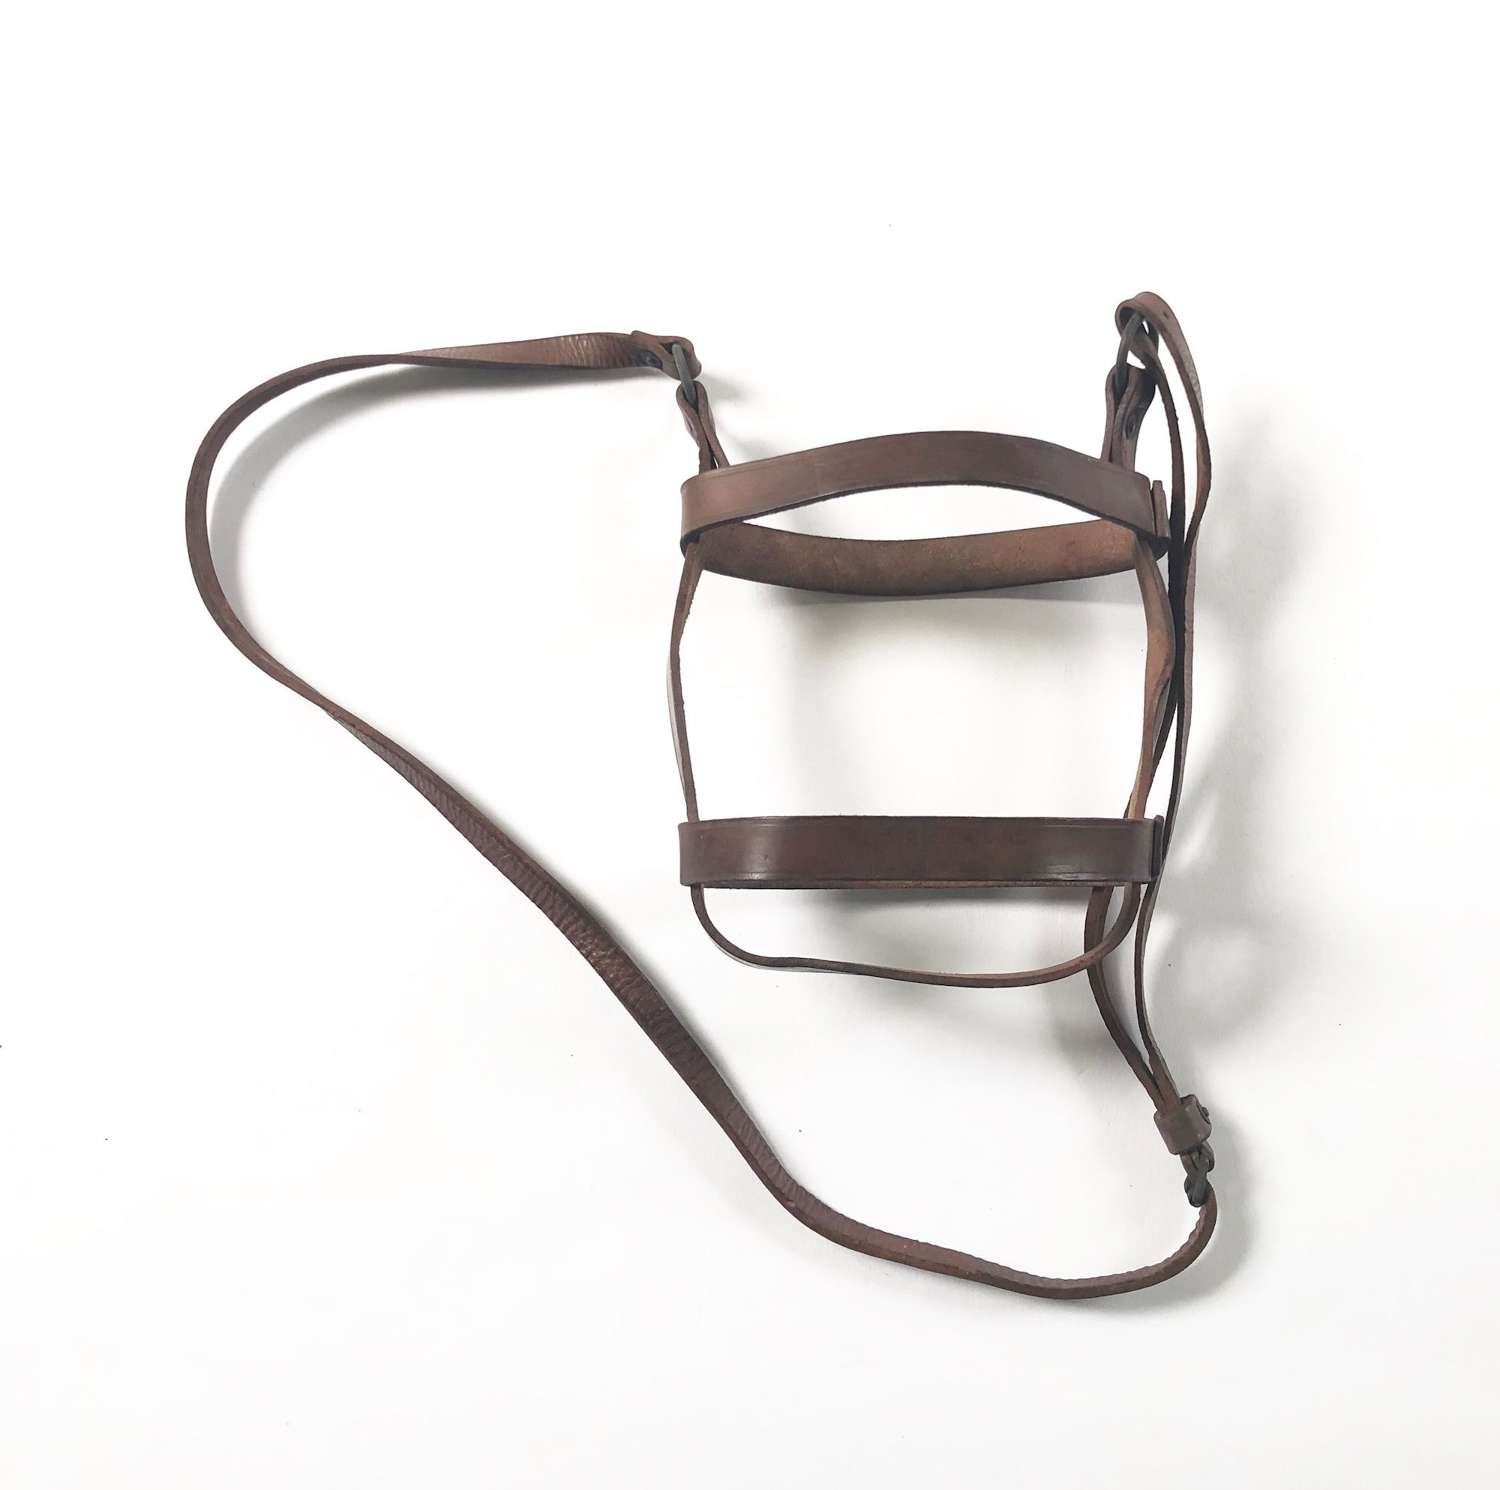 WW2 Cavalry / Home Guard Leather Water Bottle Harness.